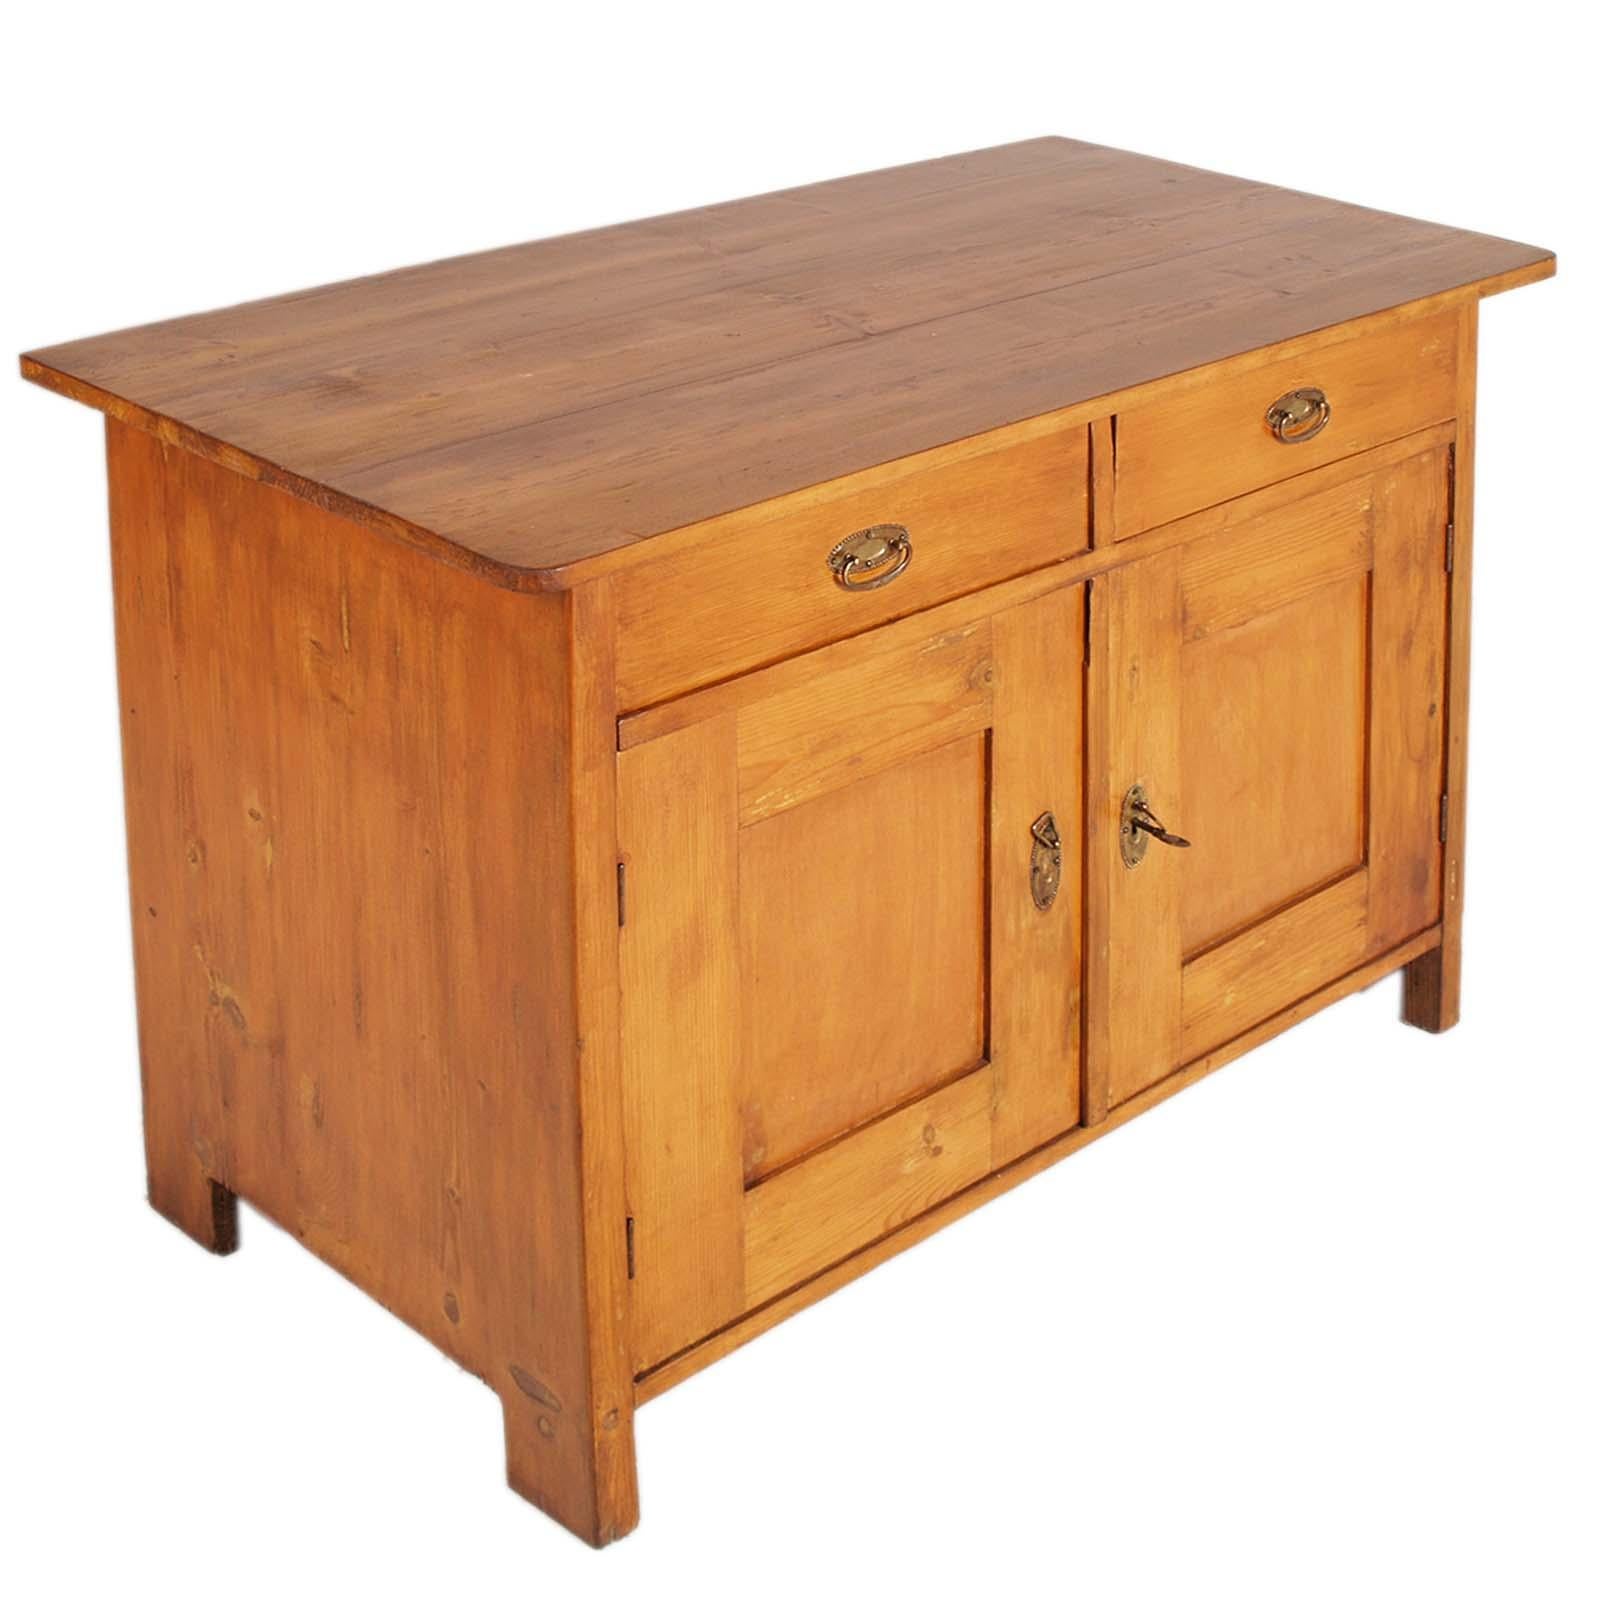 Exceptional charming antique Tyrolean handmade sideboard , in precious chestnut wood with gilded brass closing handles. The beauty and patina of this sideboard make it a precious piece of furniture in any environment. Wax polished.